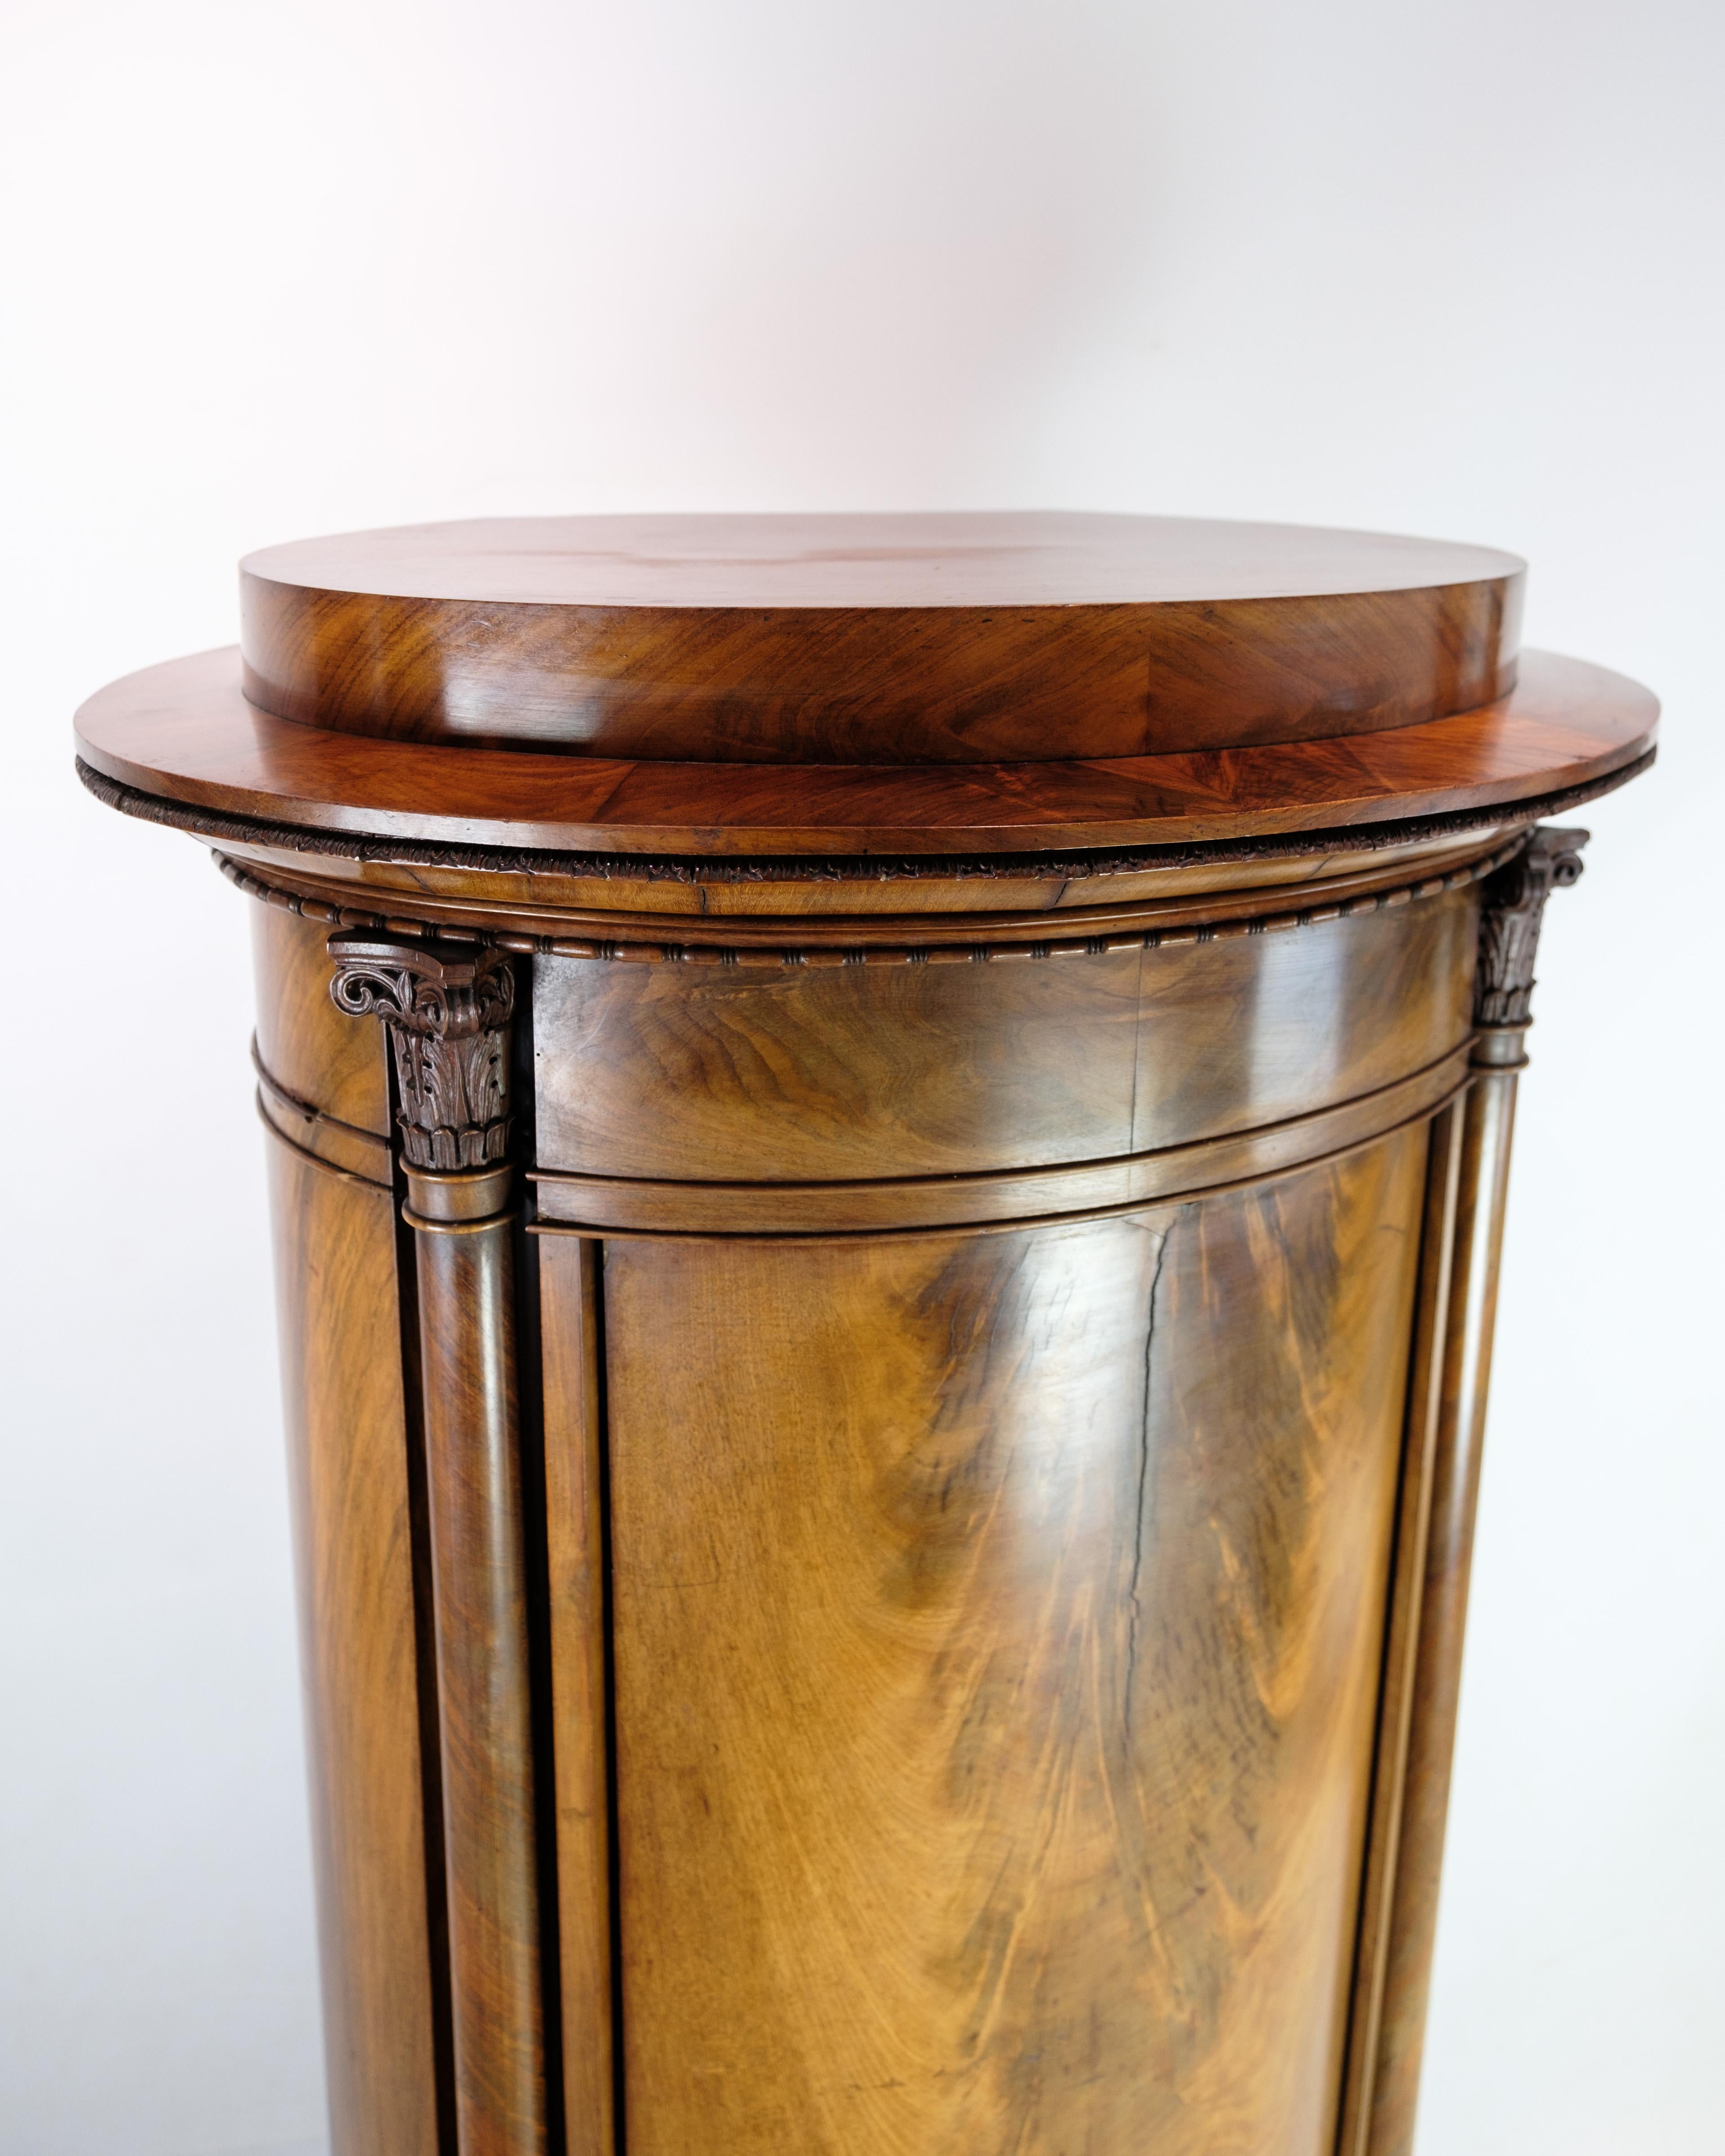 Oval Mahogany Pedestal Cabinet With Carvings From The 1820's  In Good Condition For Sale In Lejre, DK